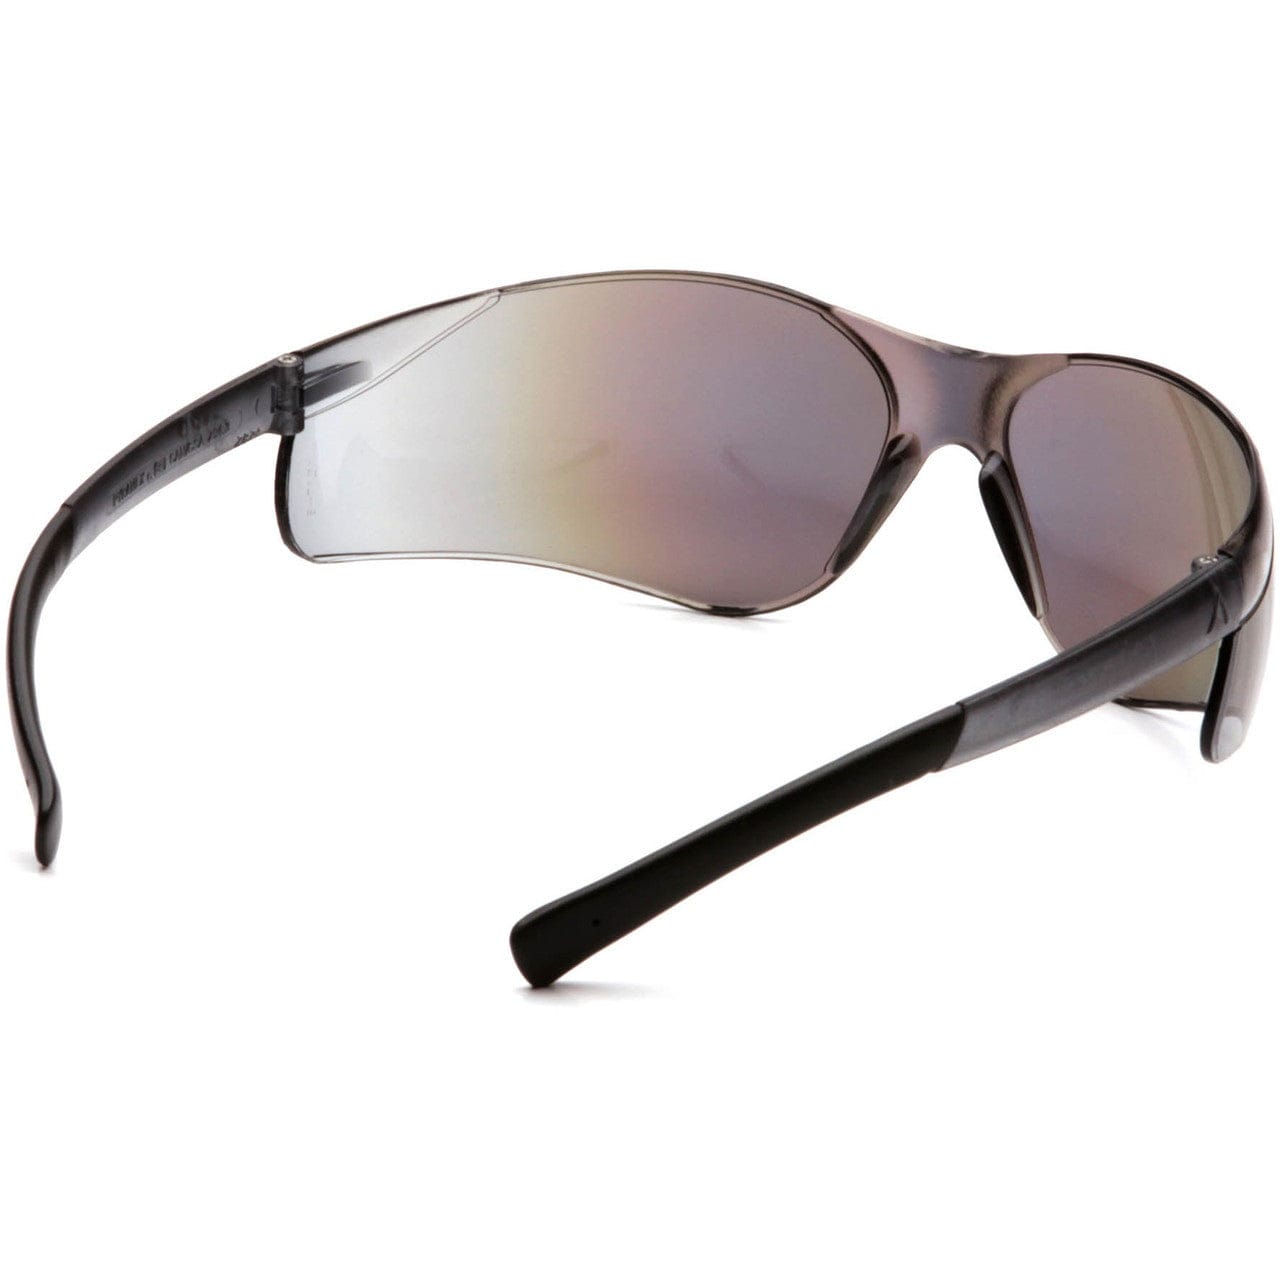 Pyramex Ztek Safety Glasses with Gold Mirror Lens S2590S Inside View